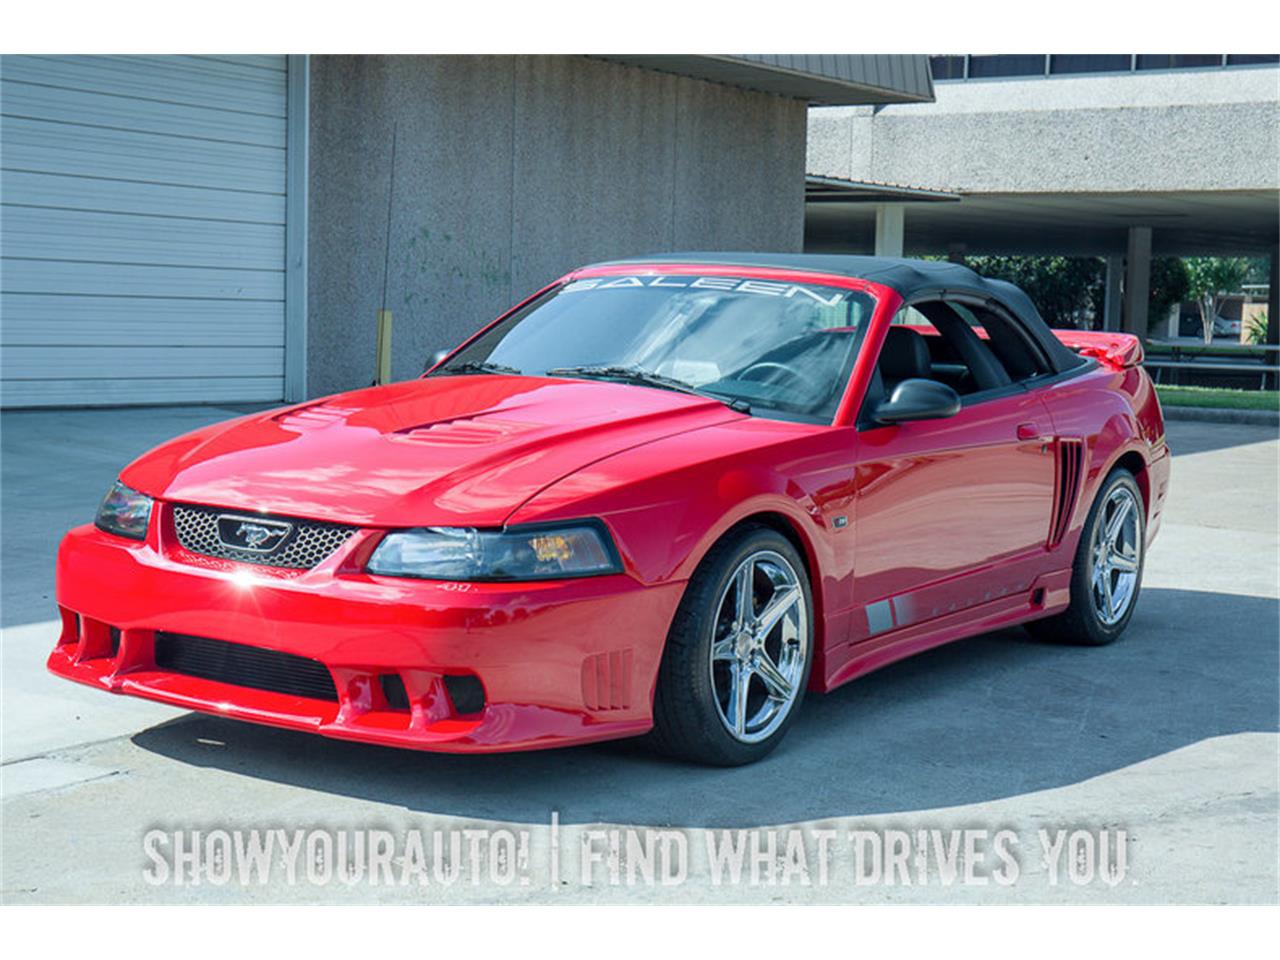 Ford Saleen Mustang S Extreme Speedster For Sale Classiccars